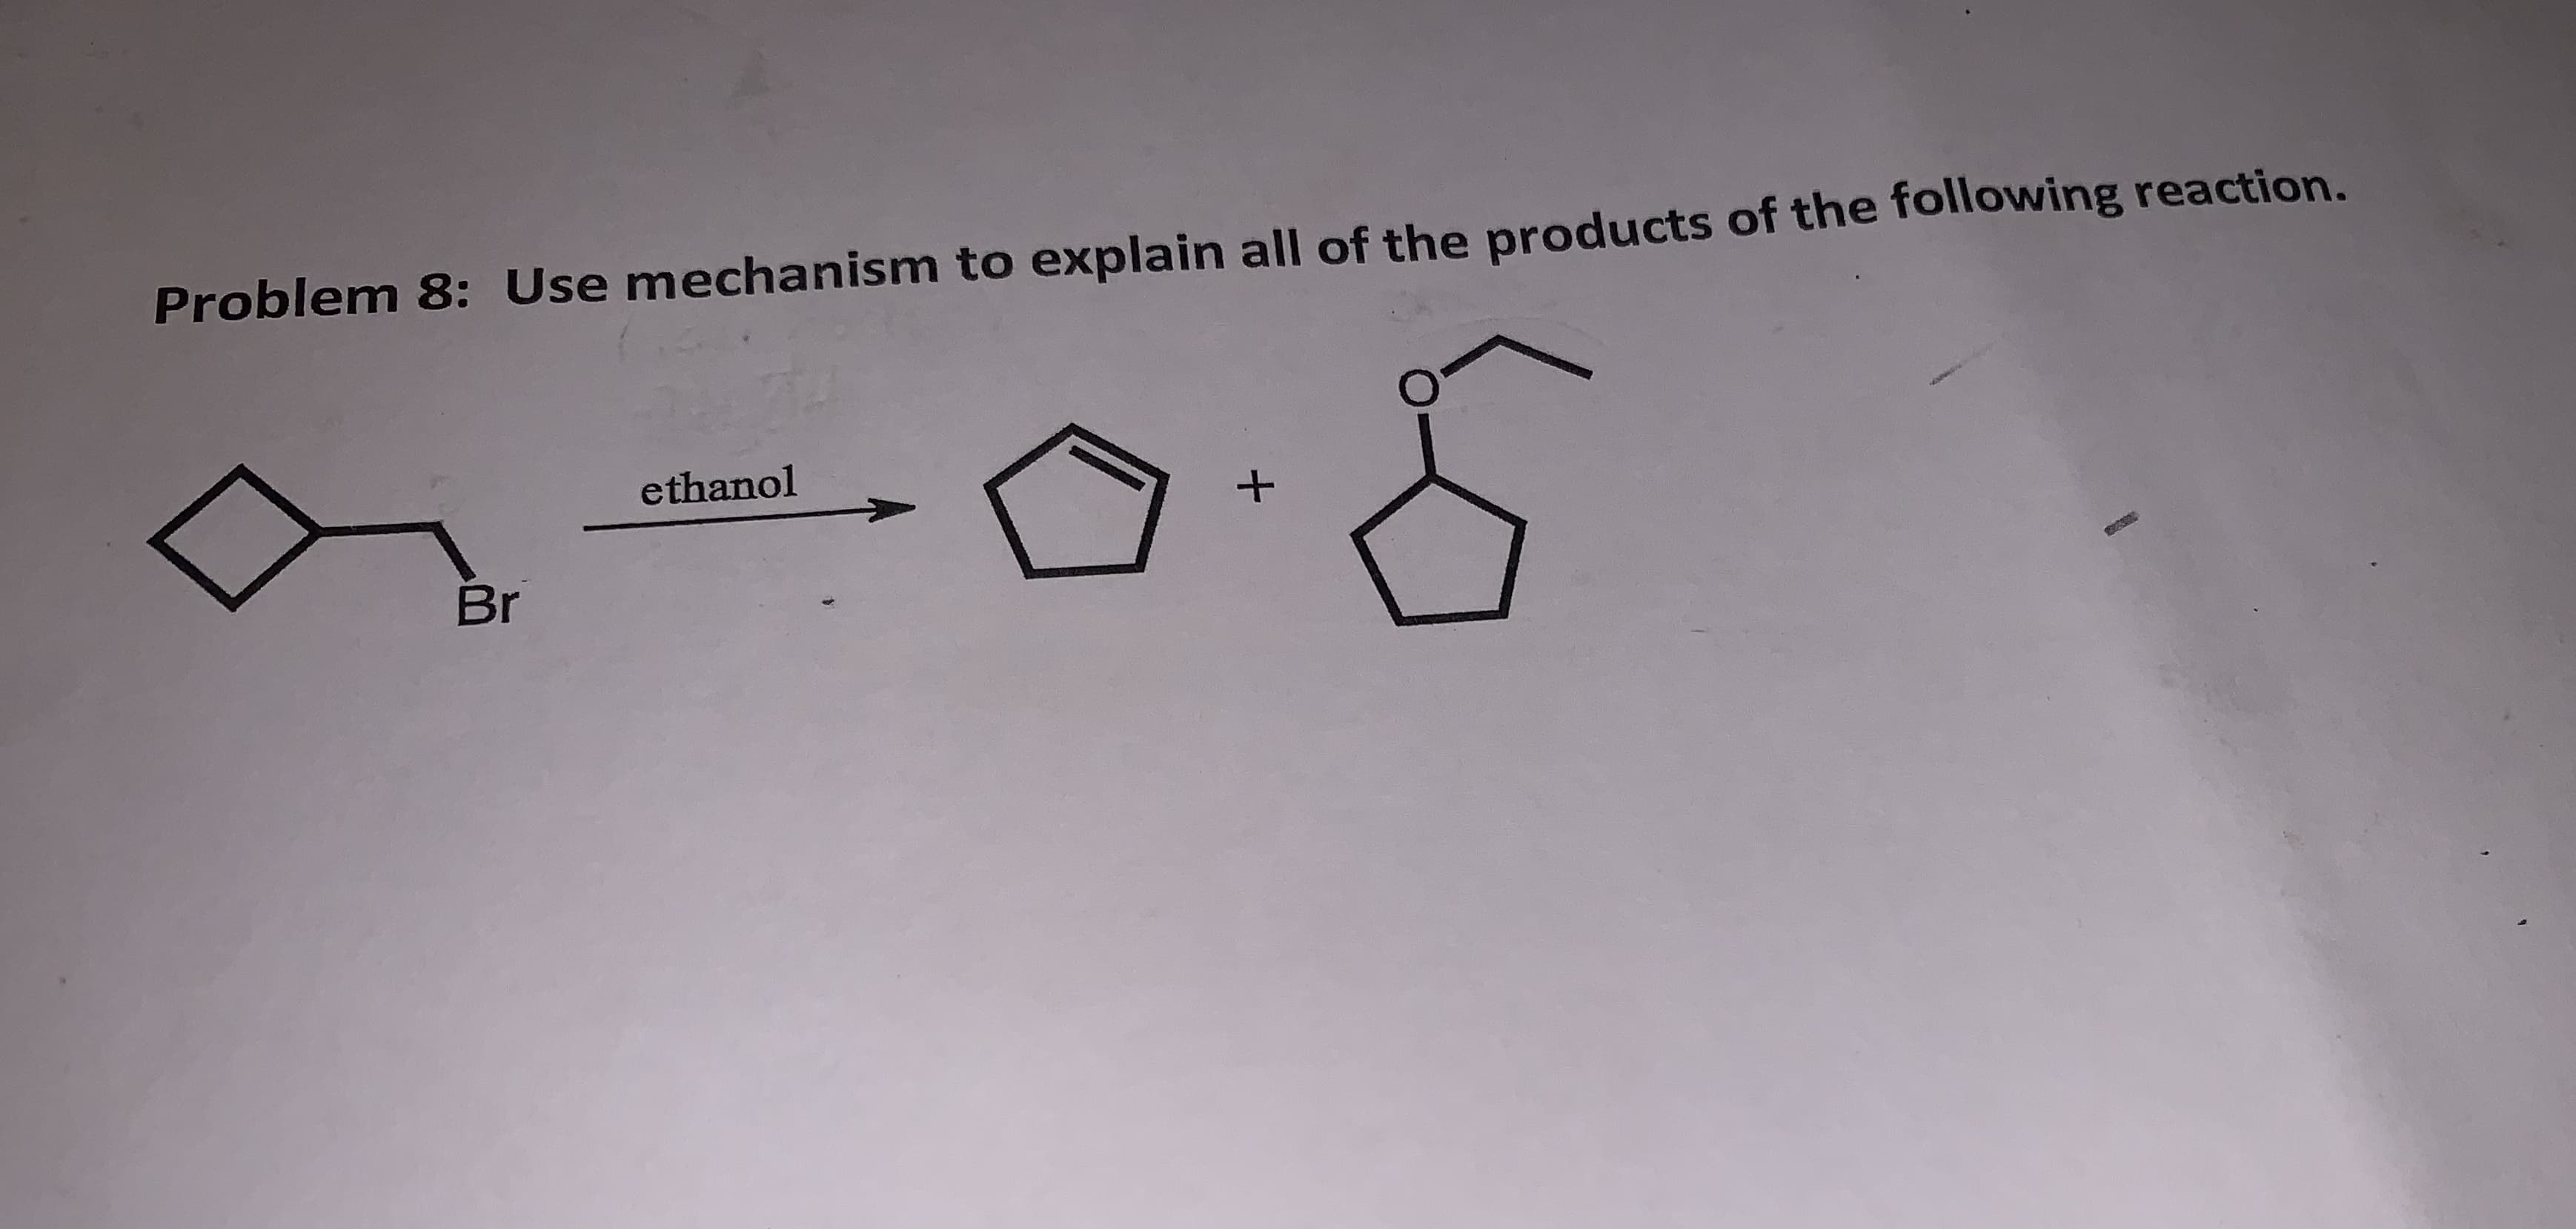 Problem 8: Use mechanism to explain all of the products of the following reaction.
ethanol
Br
+
